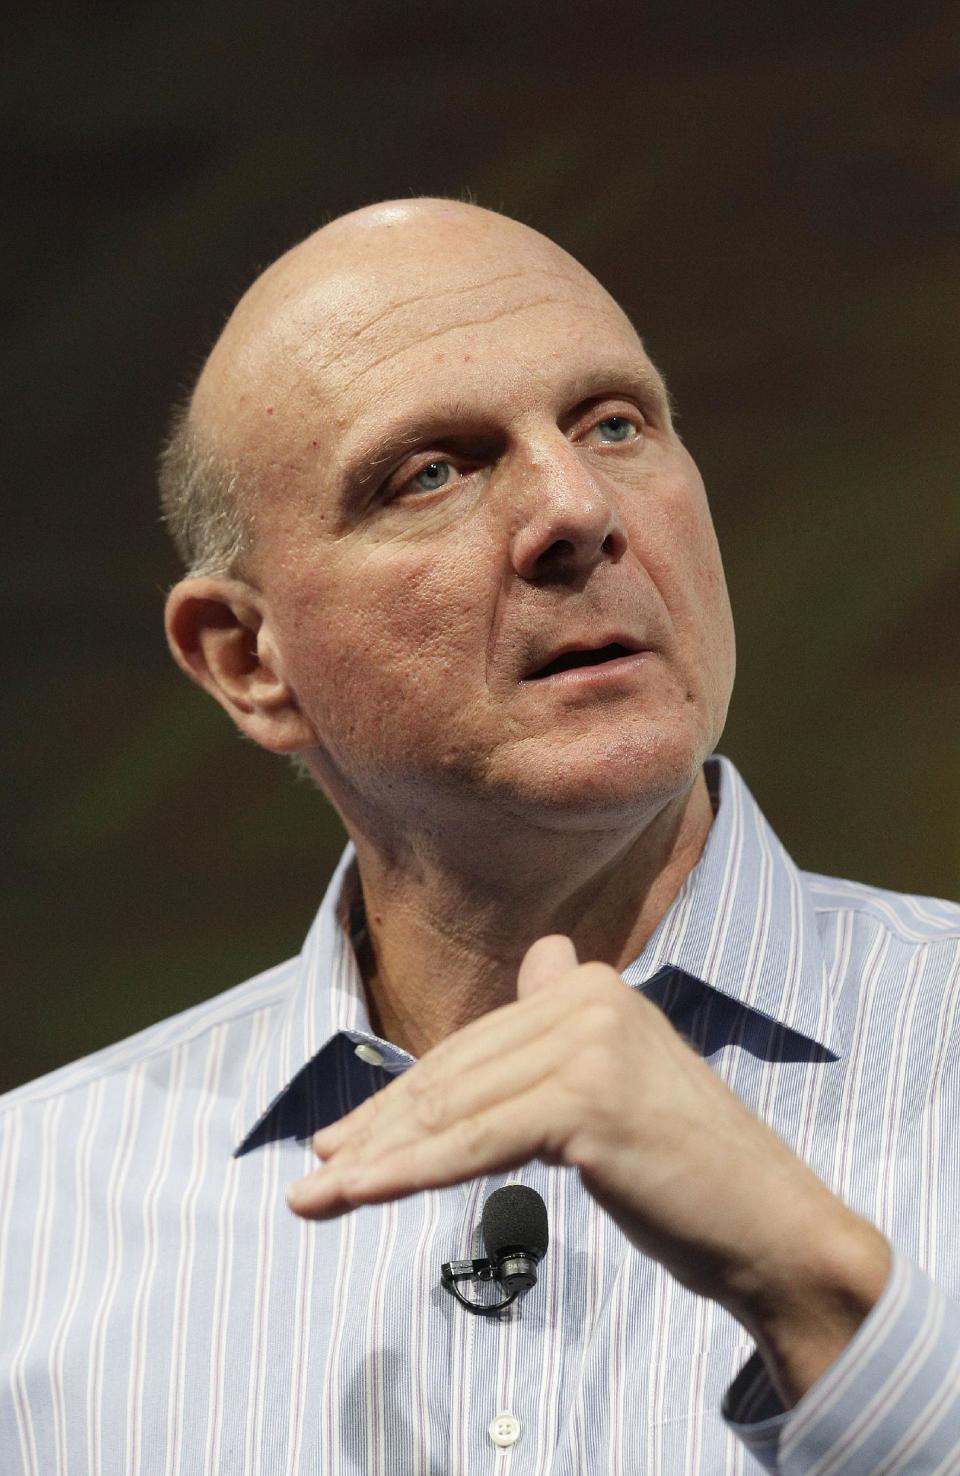 Microsoft CEO Steve Ballmer speaks at a Microsoft event in San Francisco, Monday, July 16, 2012. Microsoft unveiled a new version of its widely used, lucrative suite of word processing, spreadsheet and email programs Monday, one designed specifically with tablet computers and Internet-based storage in mind. (AP Photo/Jeff Chiu)